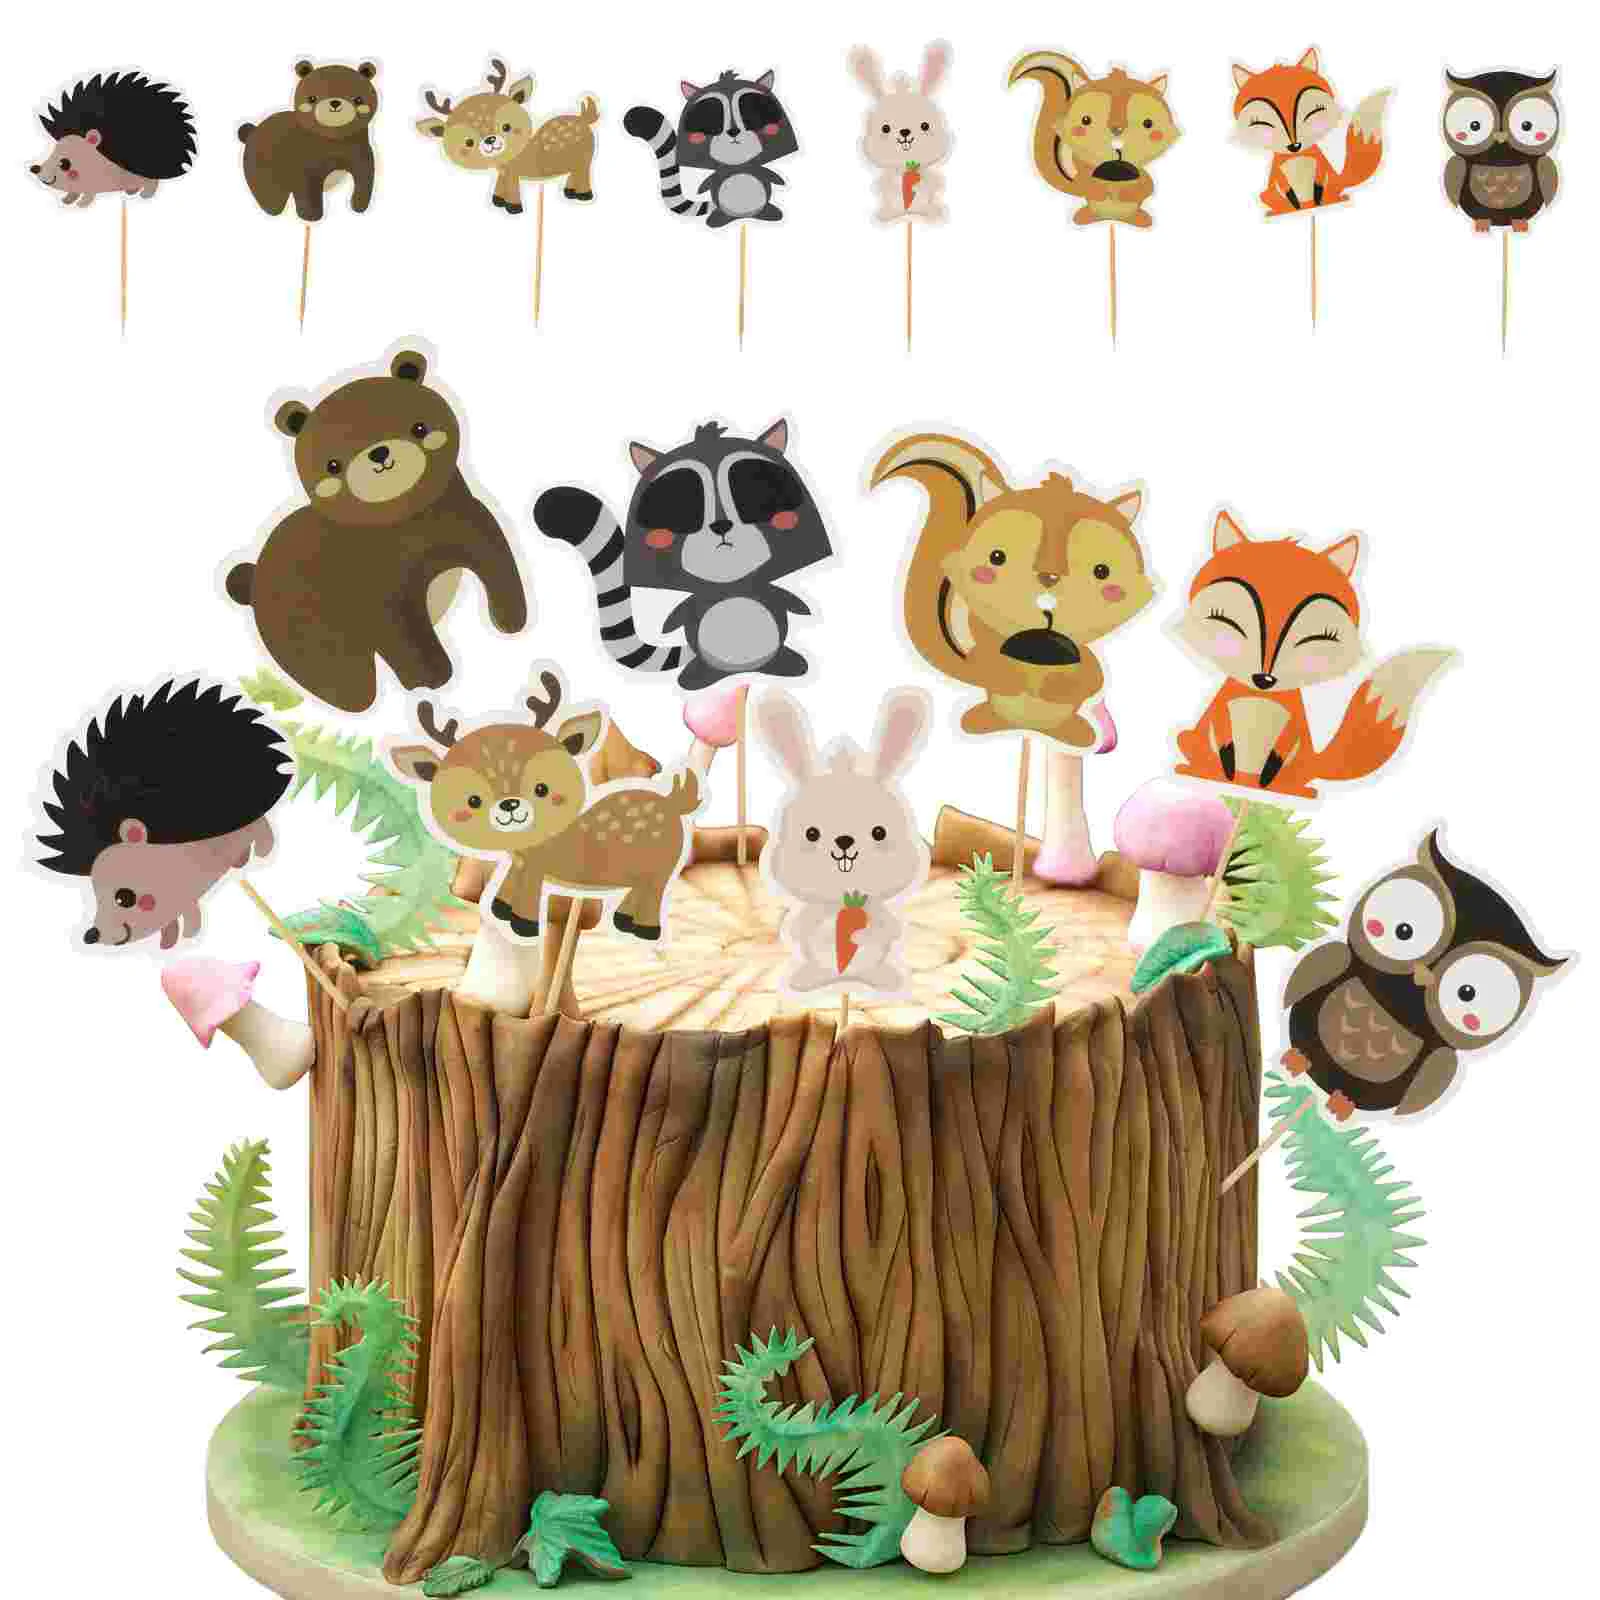 

Cake Jungle Cupcake Toppers Decorations Topper Animal Woodland Baby Shower Theme Forest Owl Hedgehog Squirrel Animals Birthday